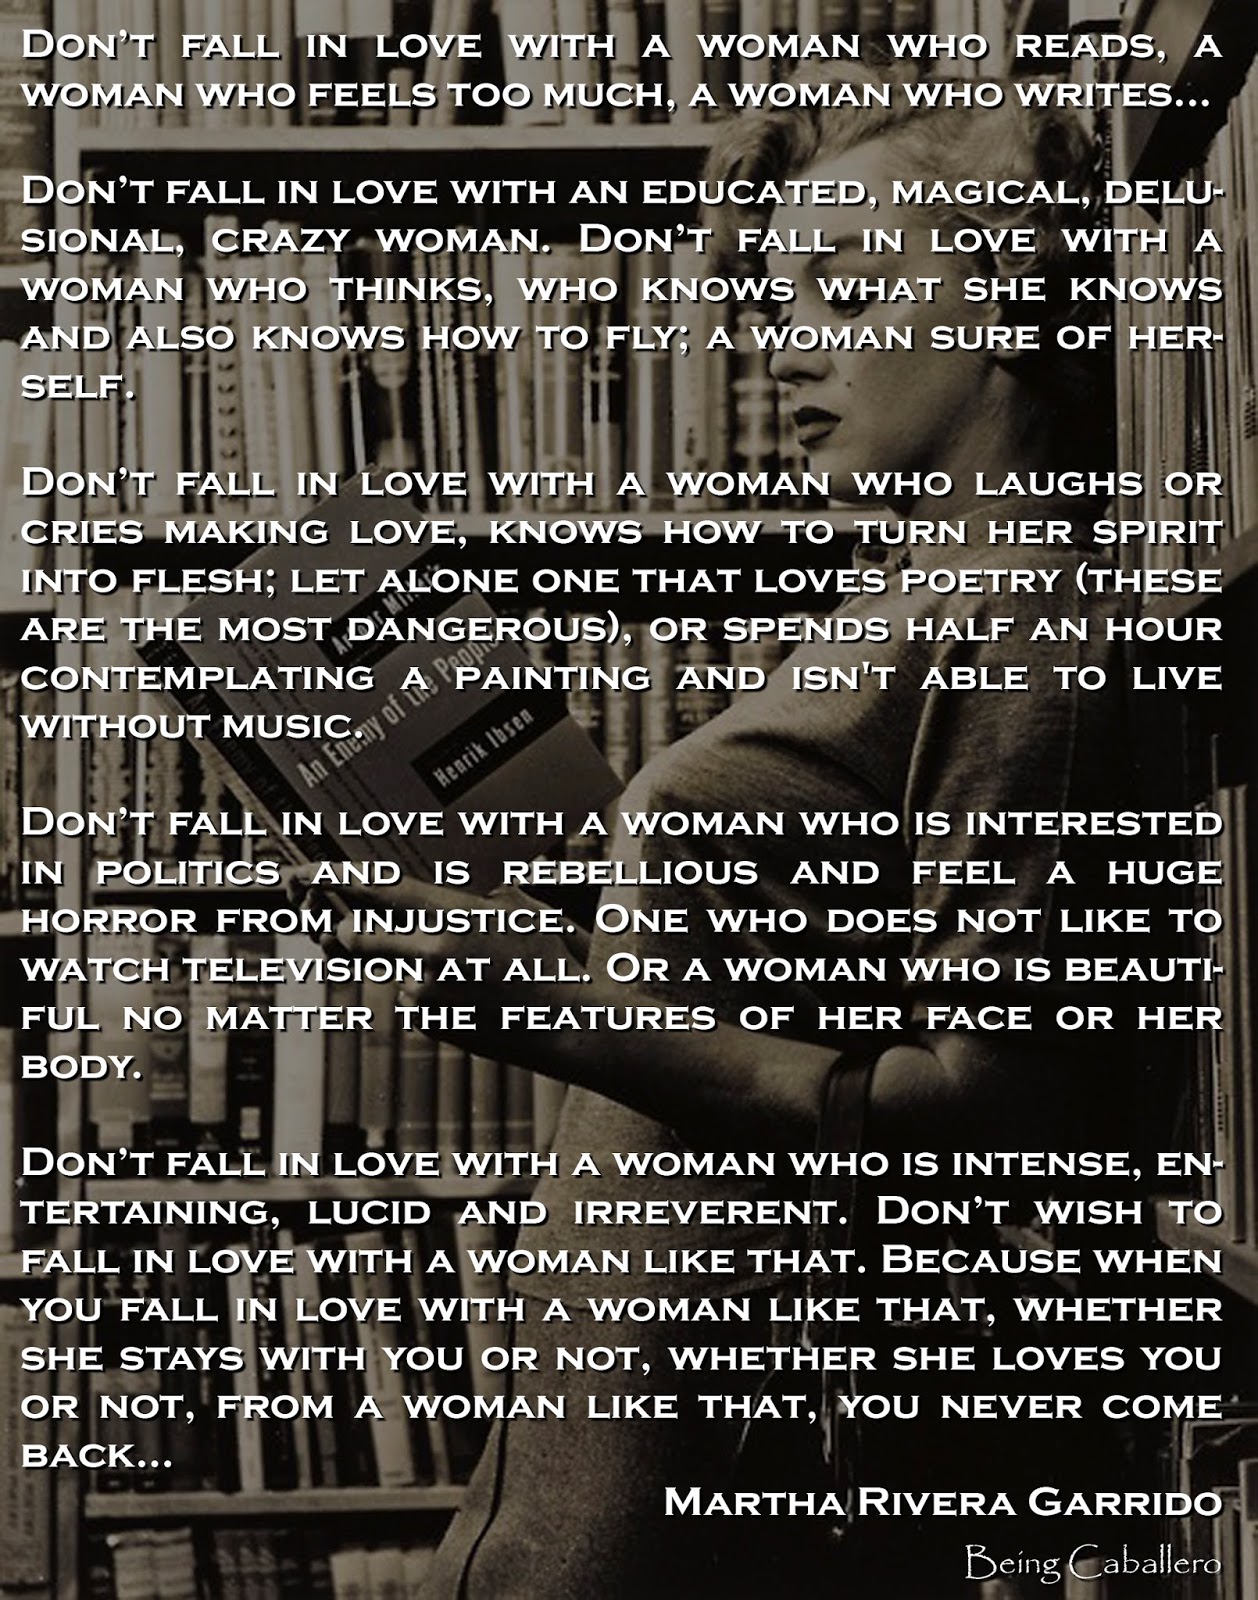 "Don t fall in love with a woman who reads "